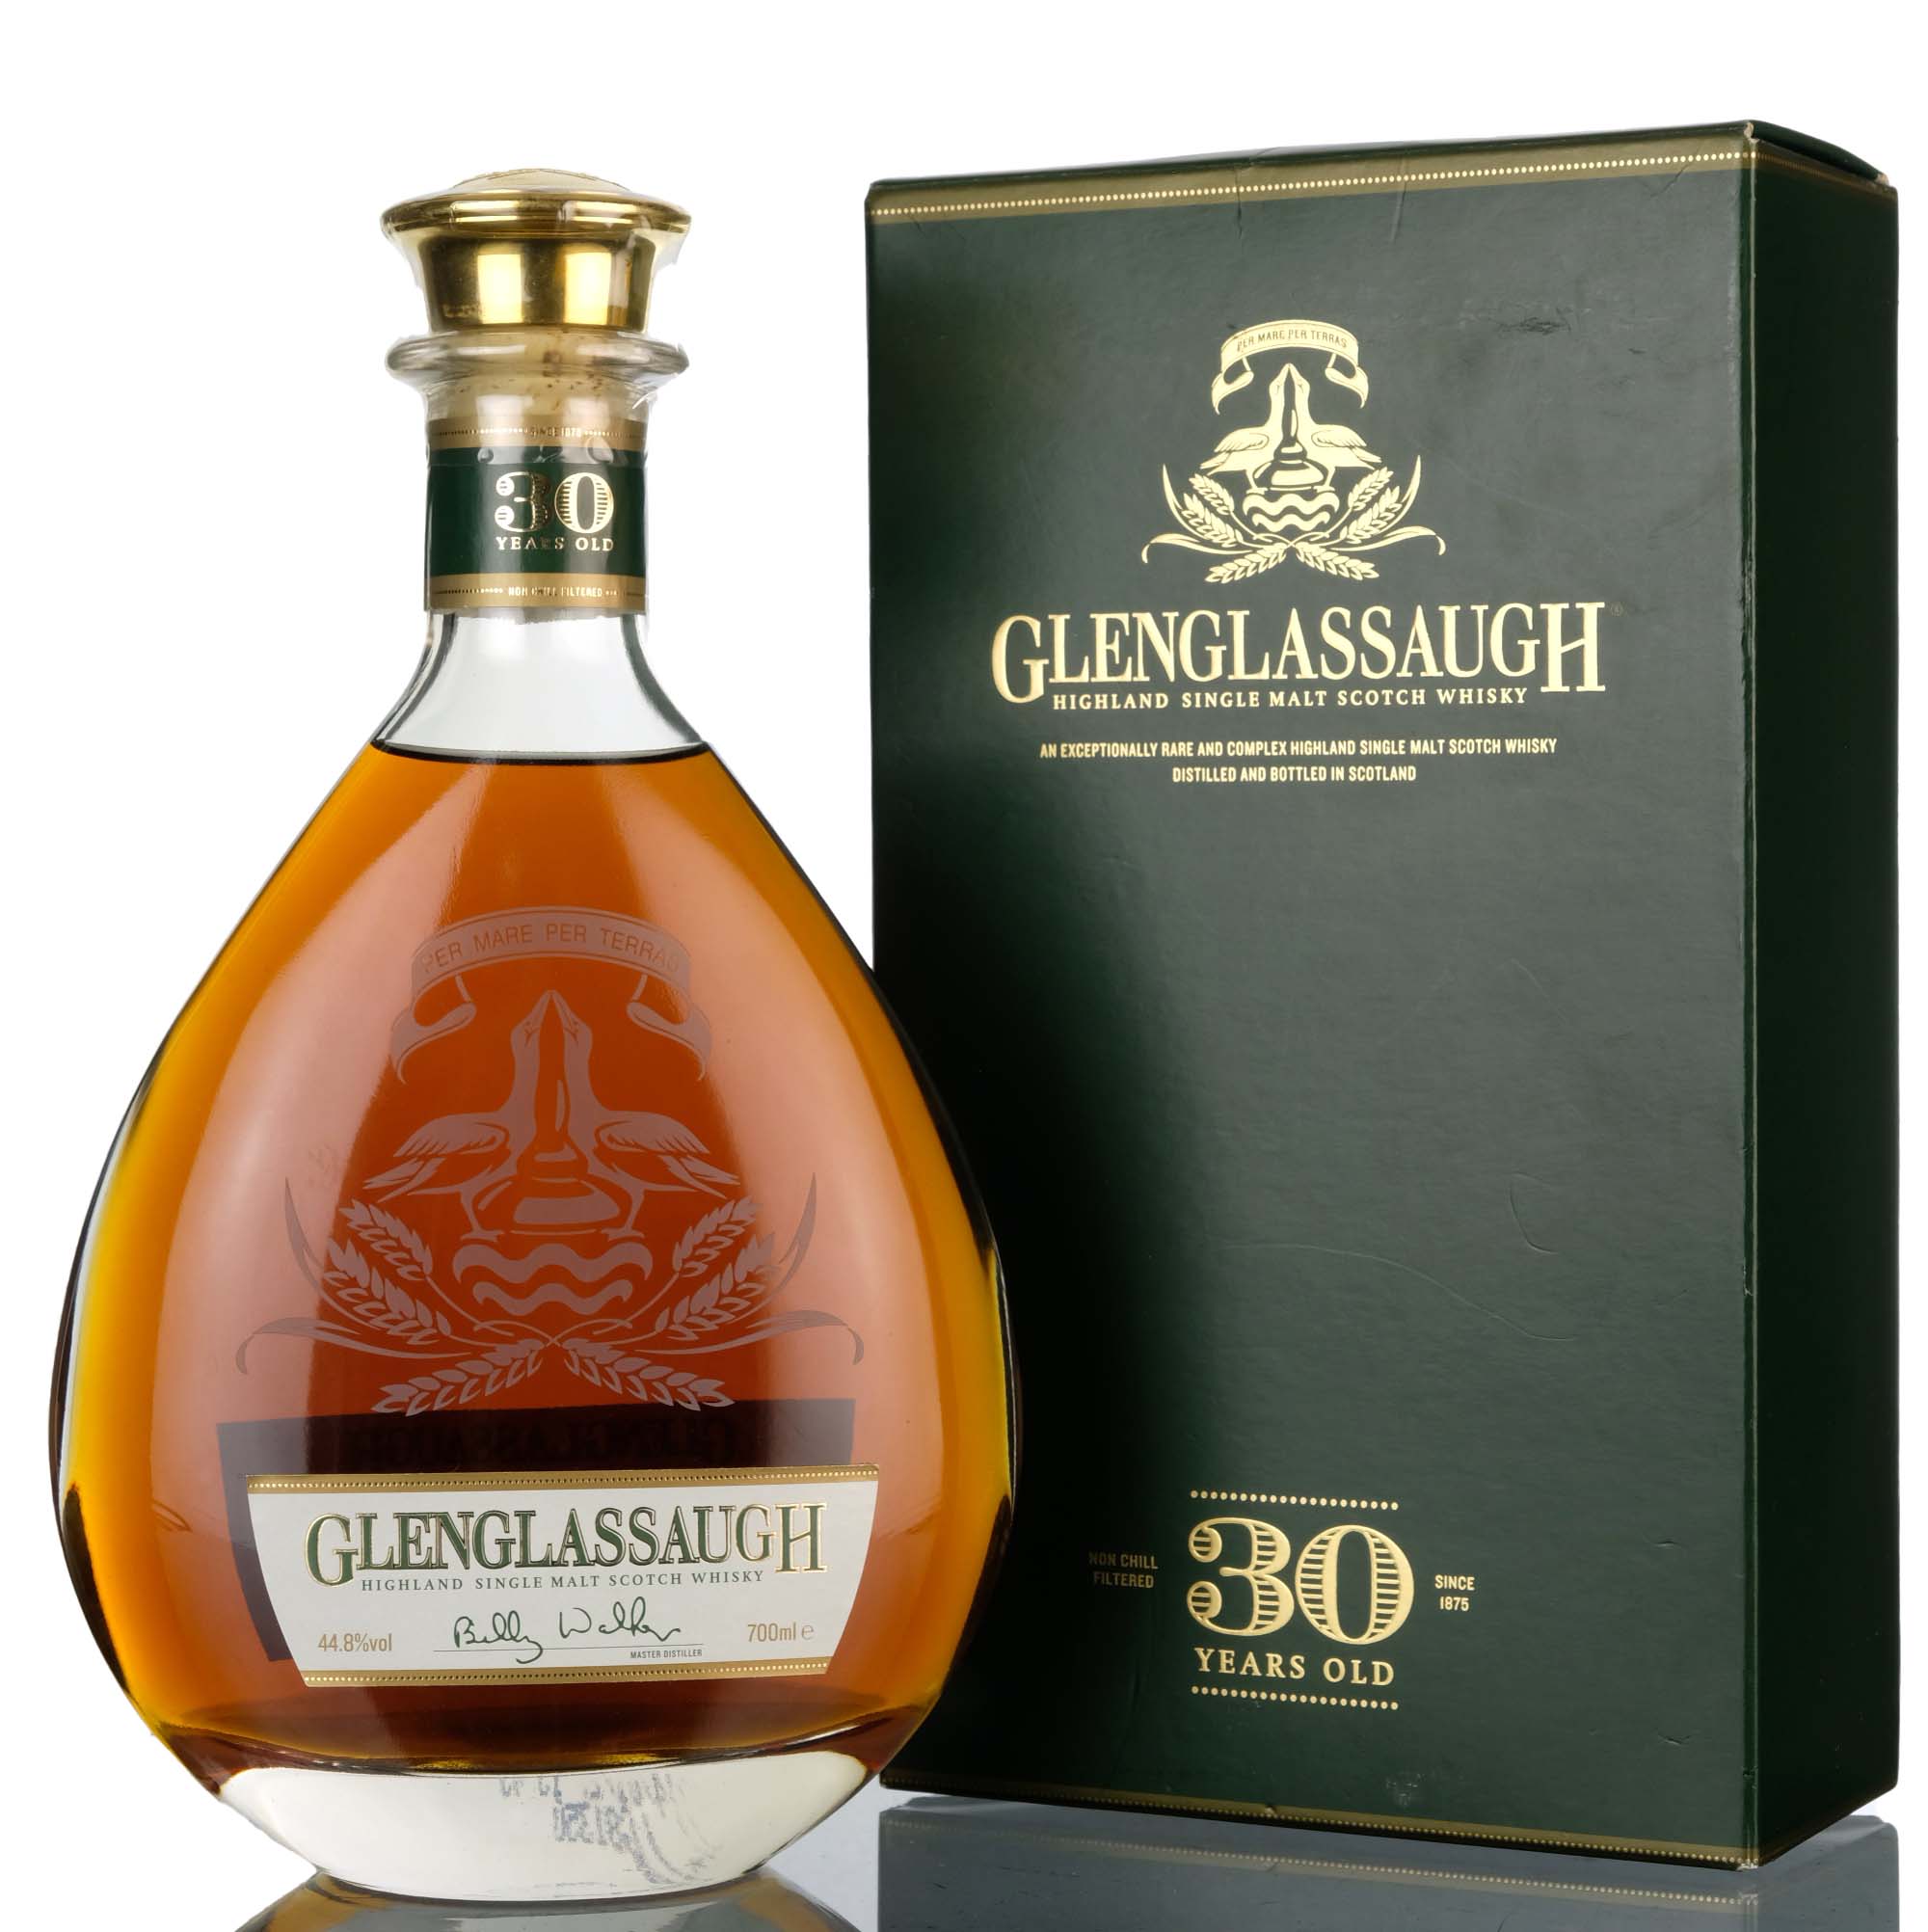 Glenglassaugh 30 Year Old - 2014 Release